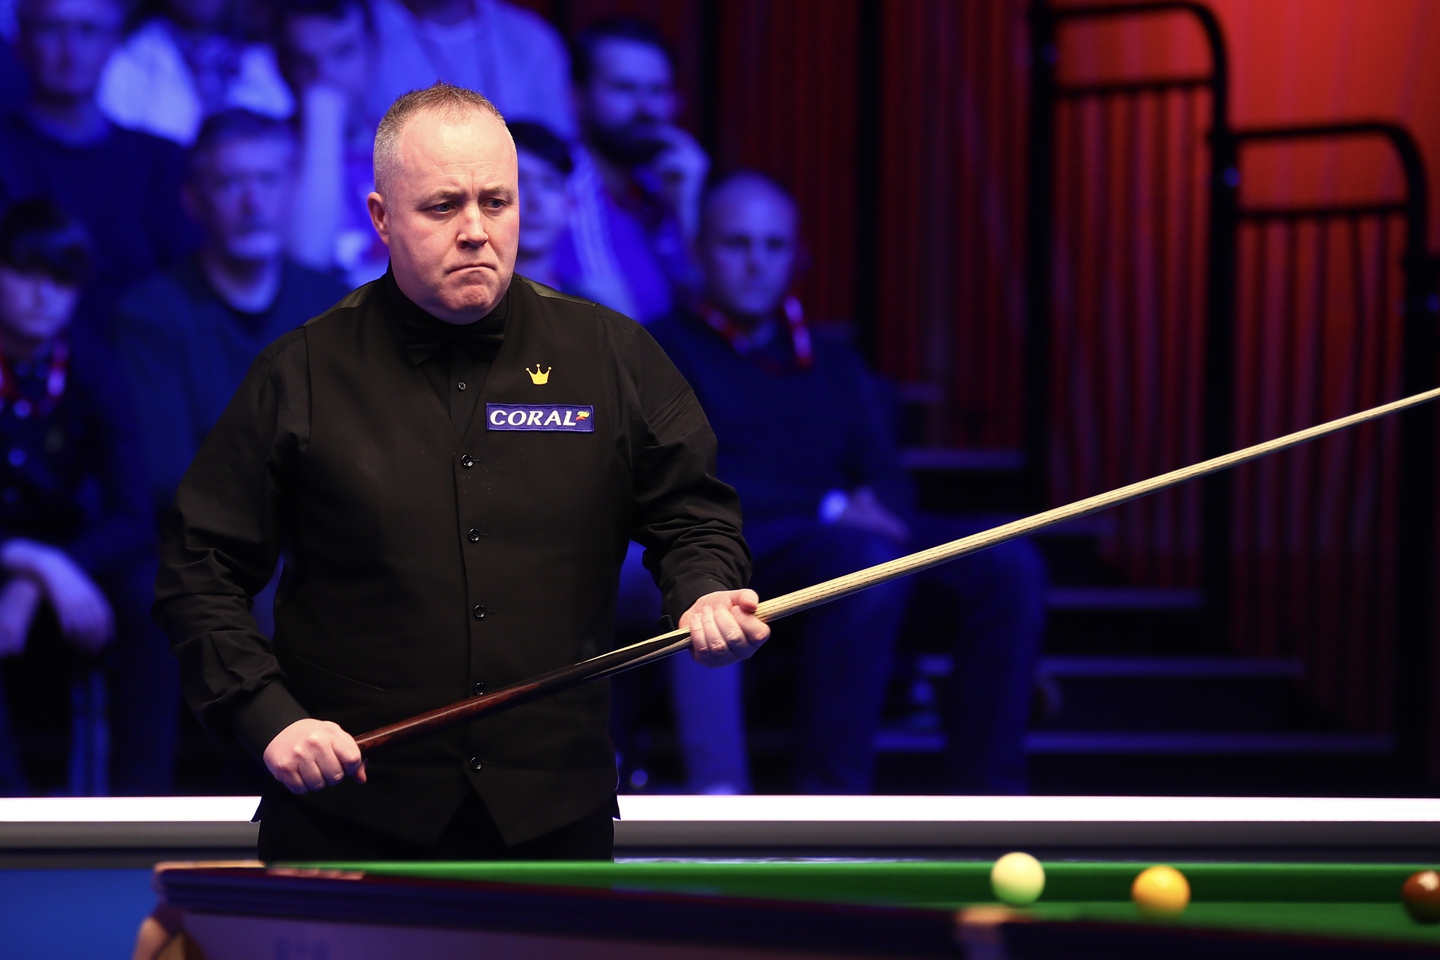 Who is the greatest snooker player of all time?